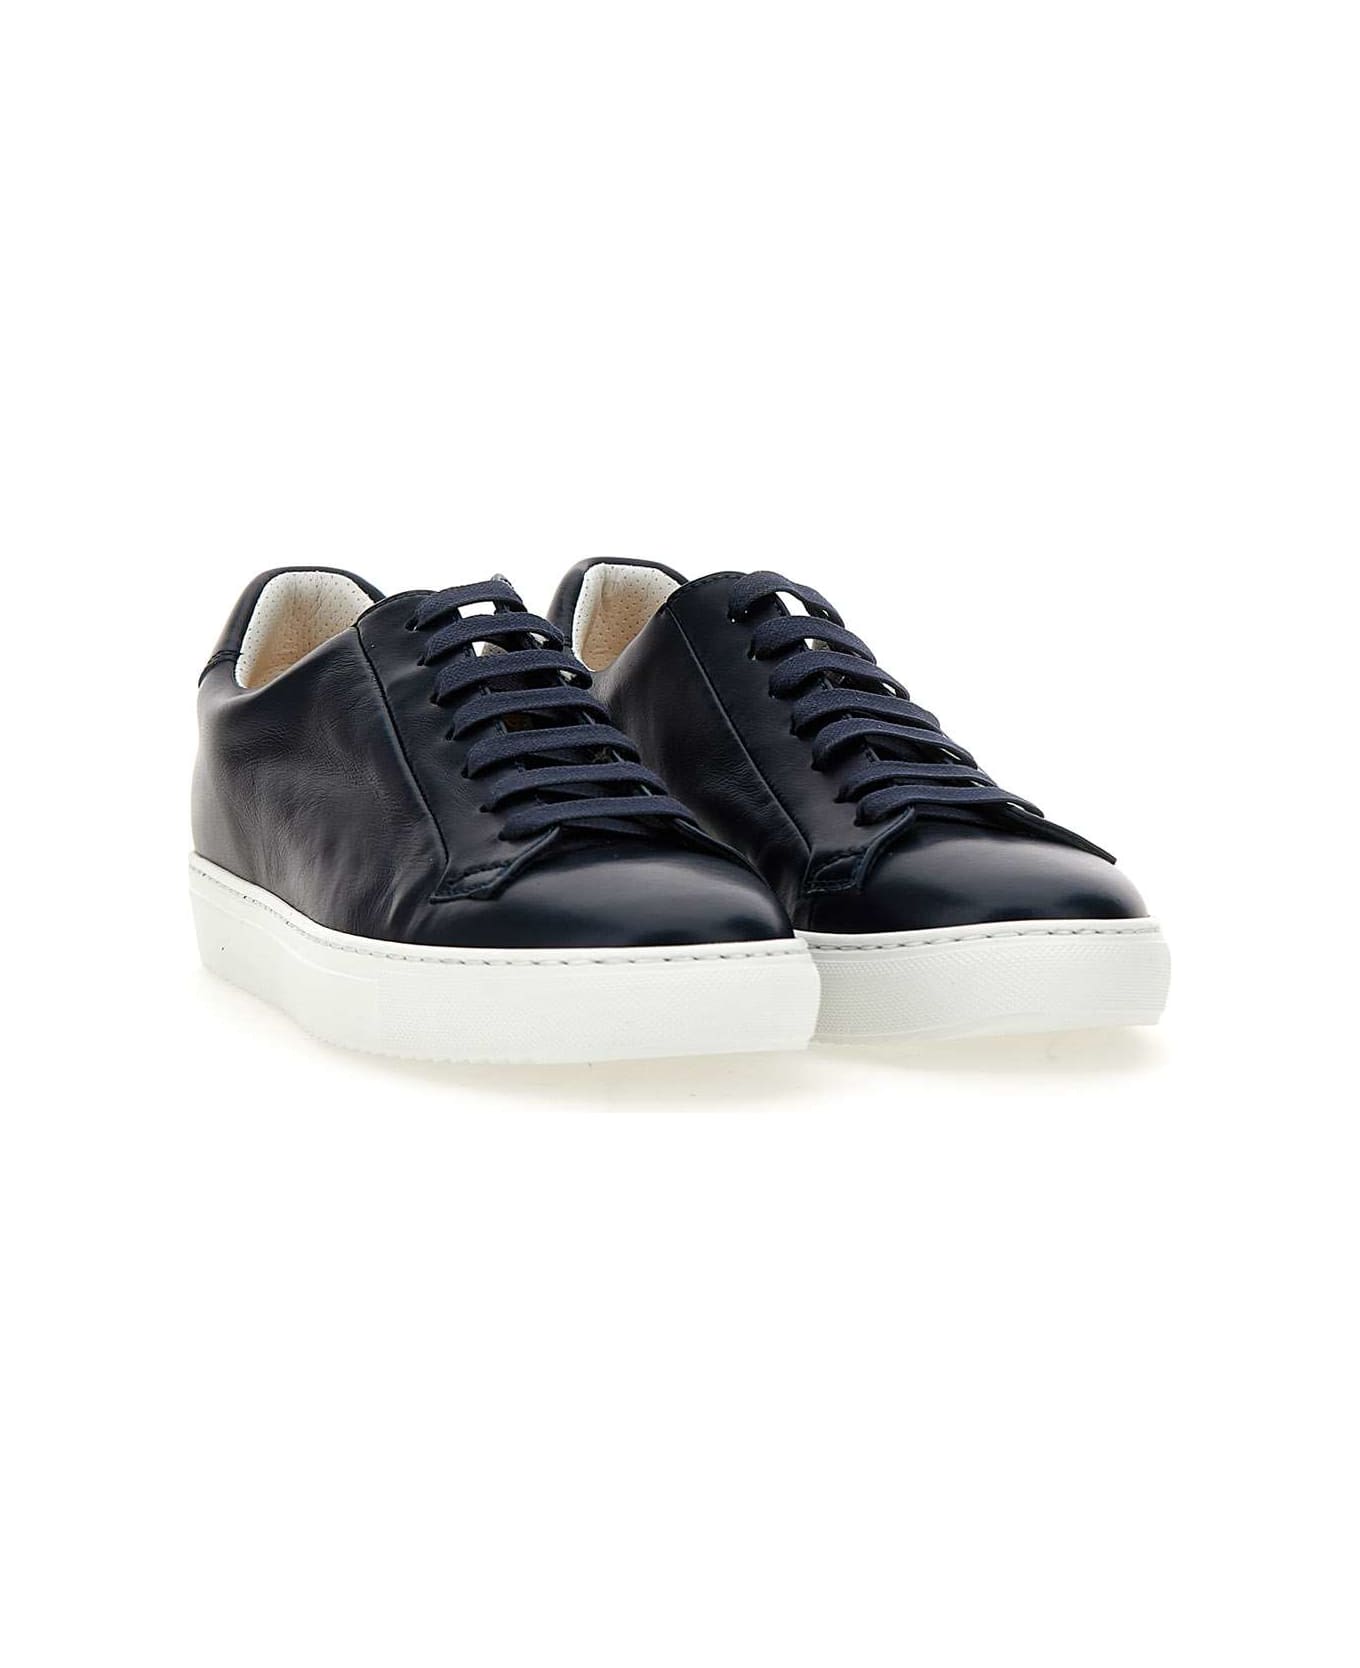 Doucal's "chiffon" Leather Sneakers - BLUE スニーカー